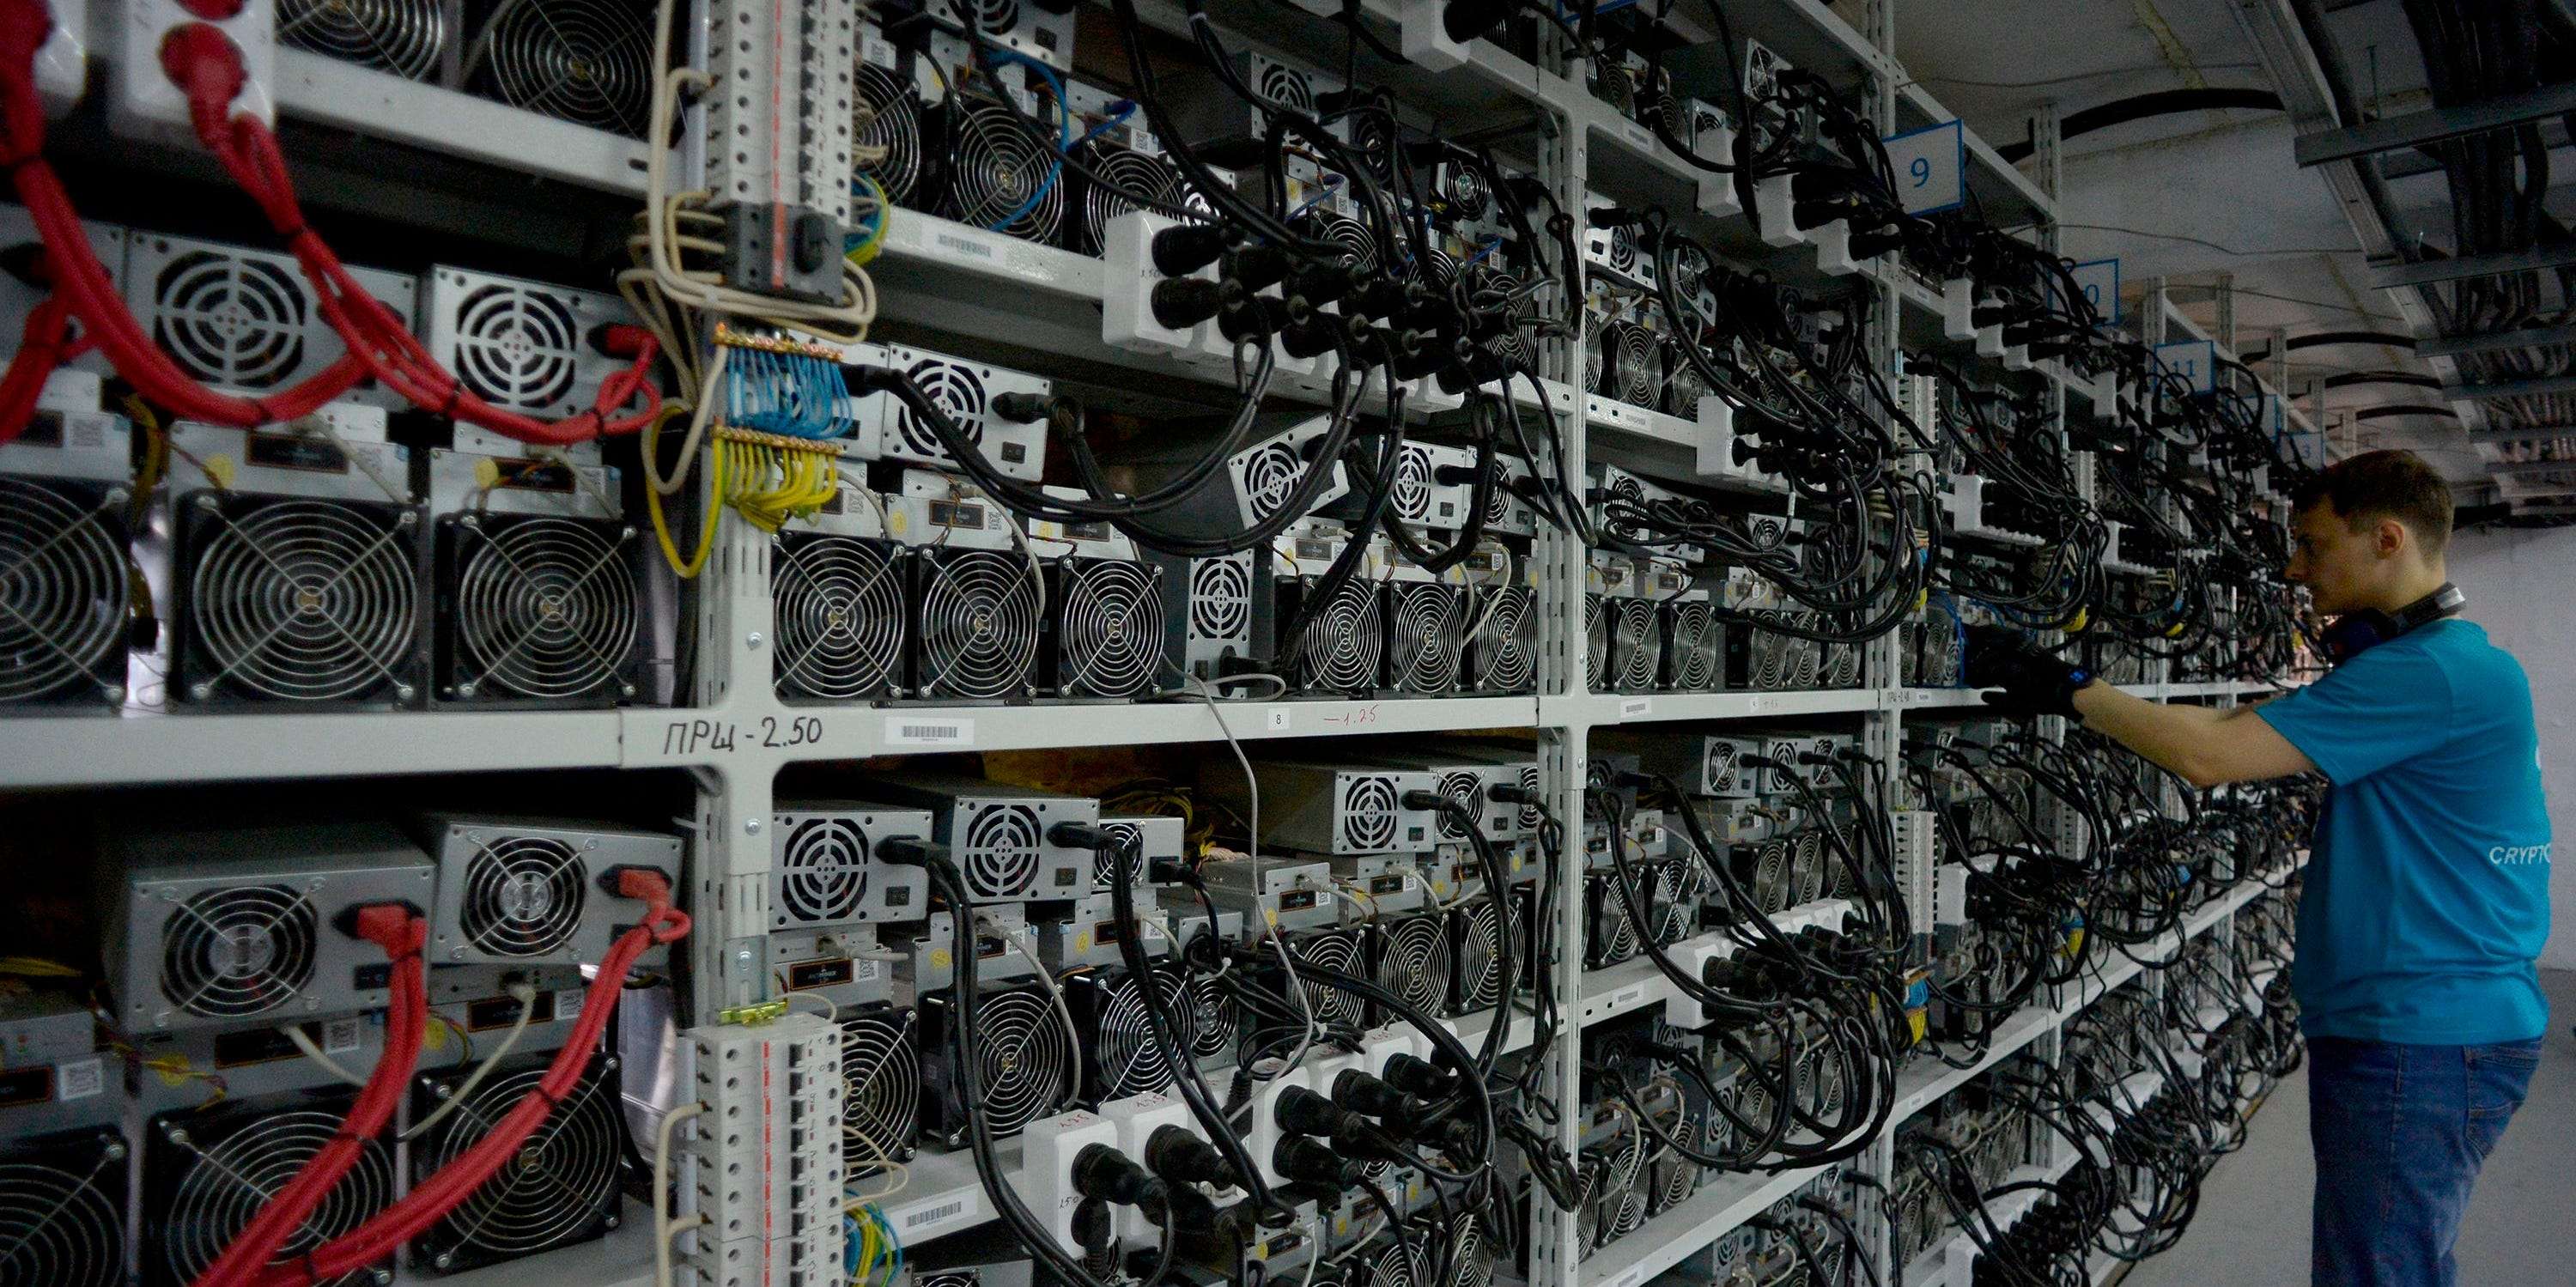 Iran has banned cryptocurrency mining over the summer ahead of an anticipated surge in electricity demand, Bloomberg first reported. The country the p